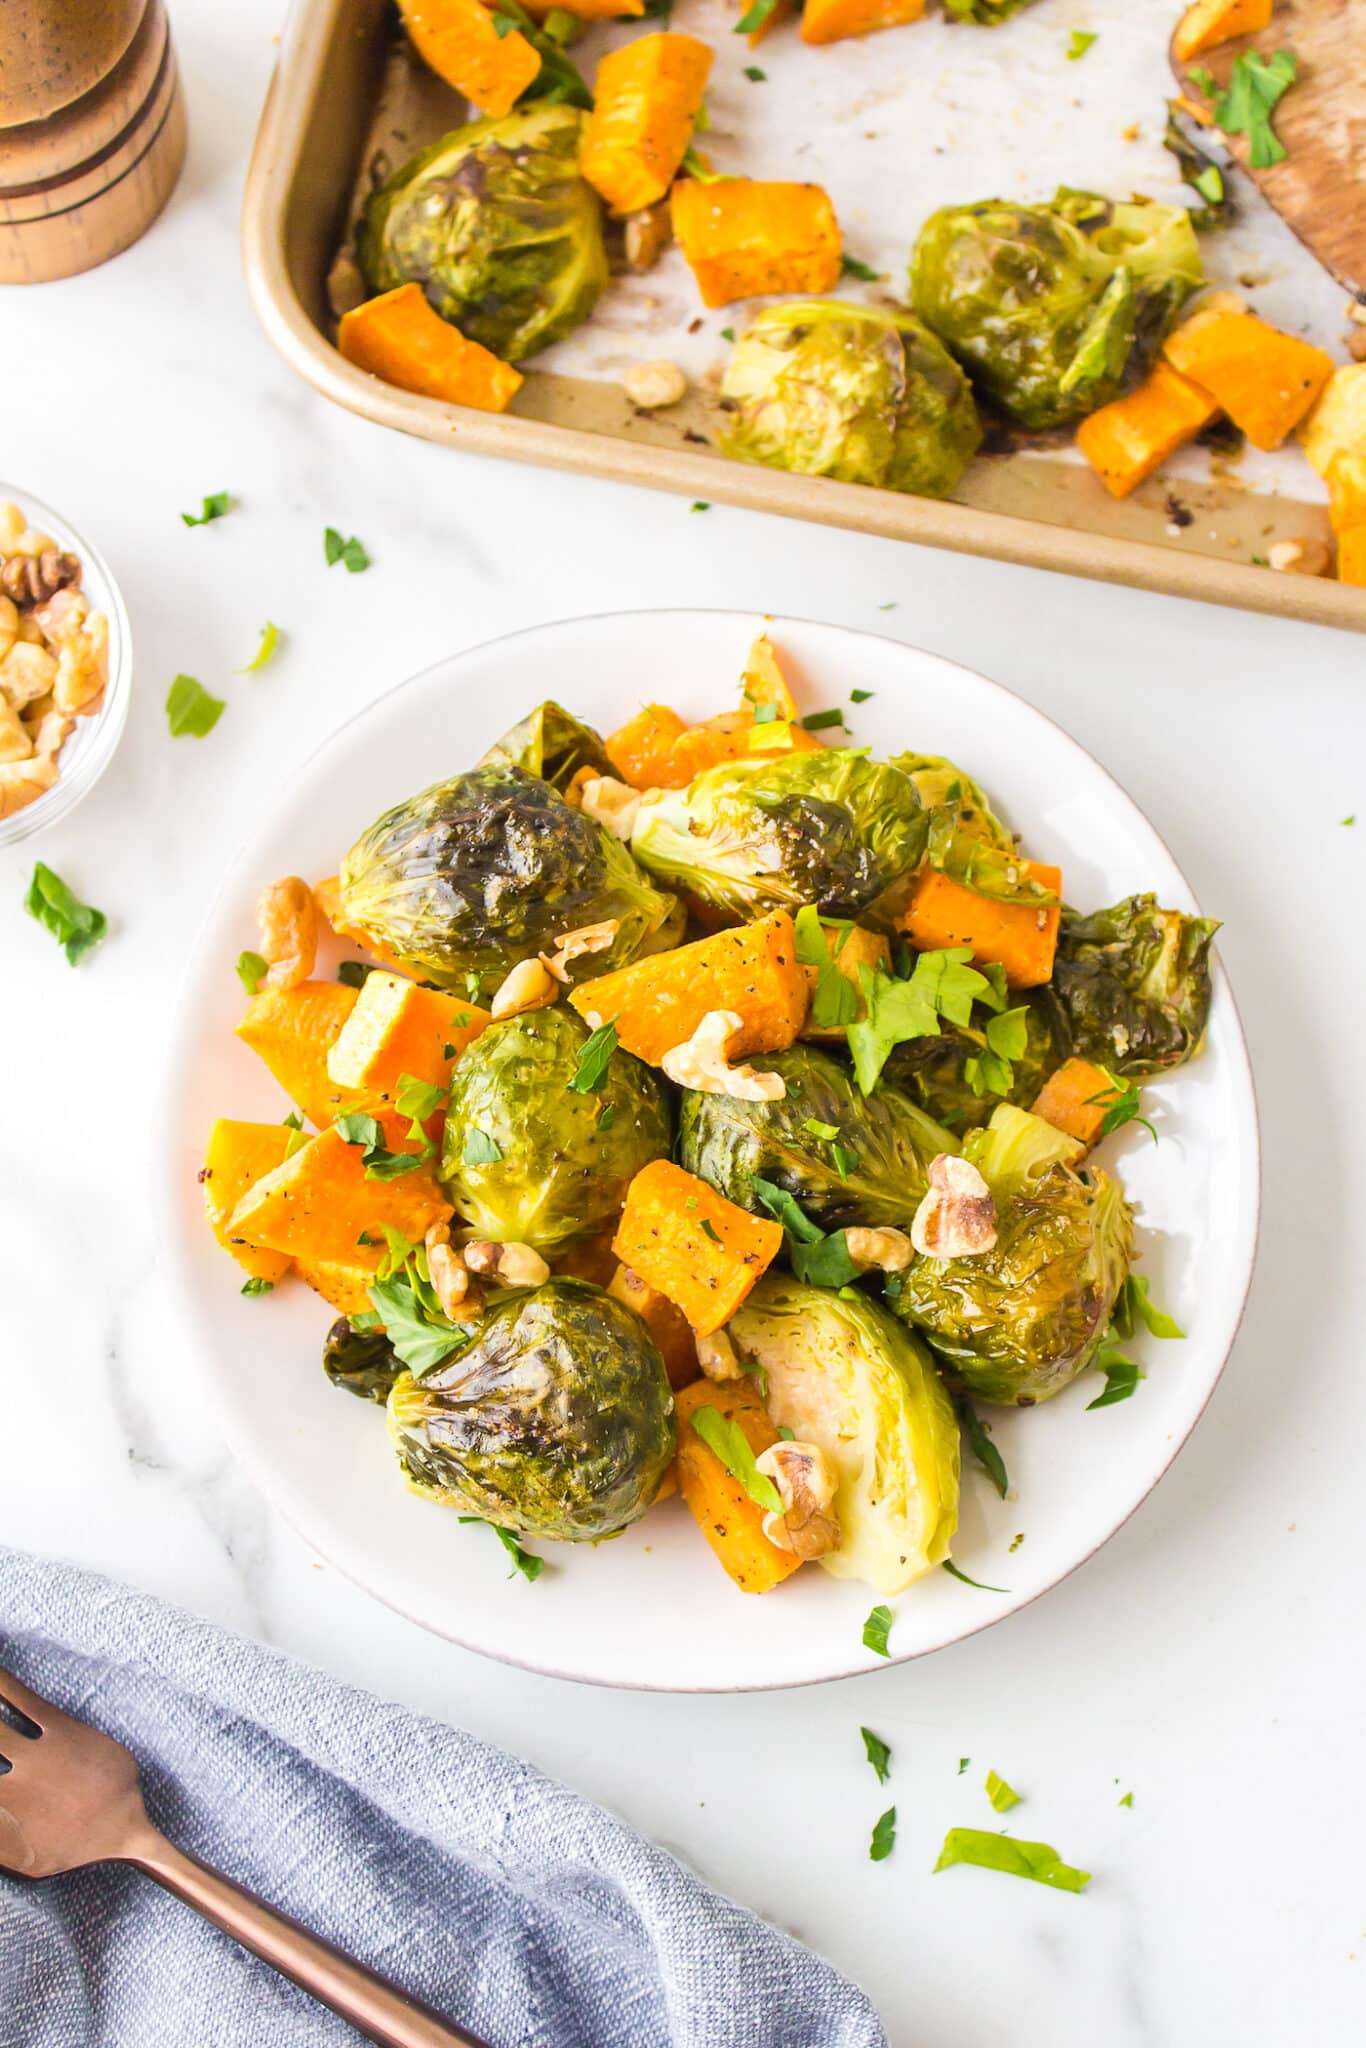 Roasted brussels sprouts and sweet potatoes on a white plate.